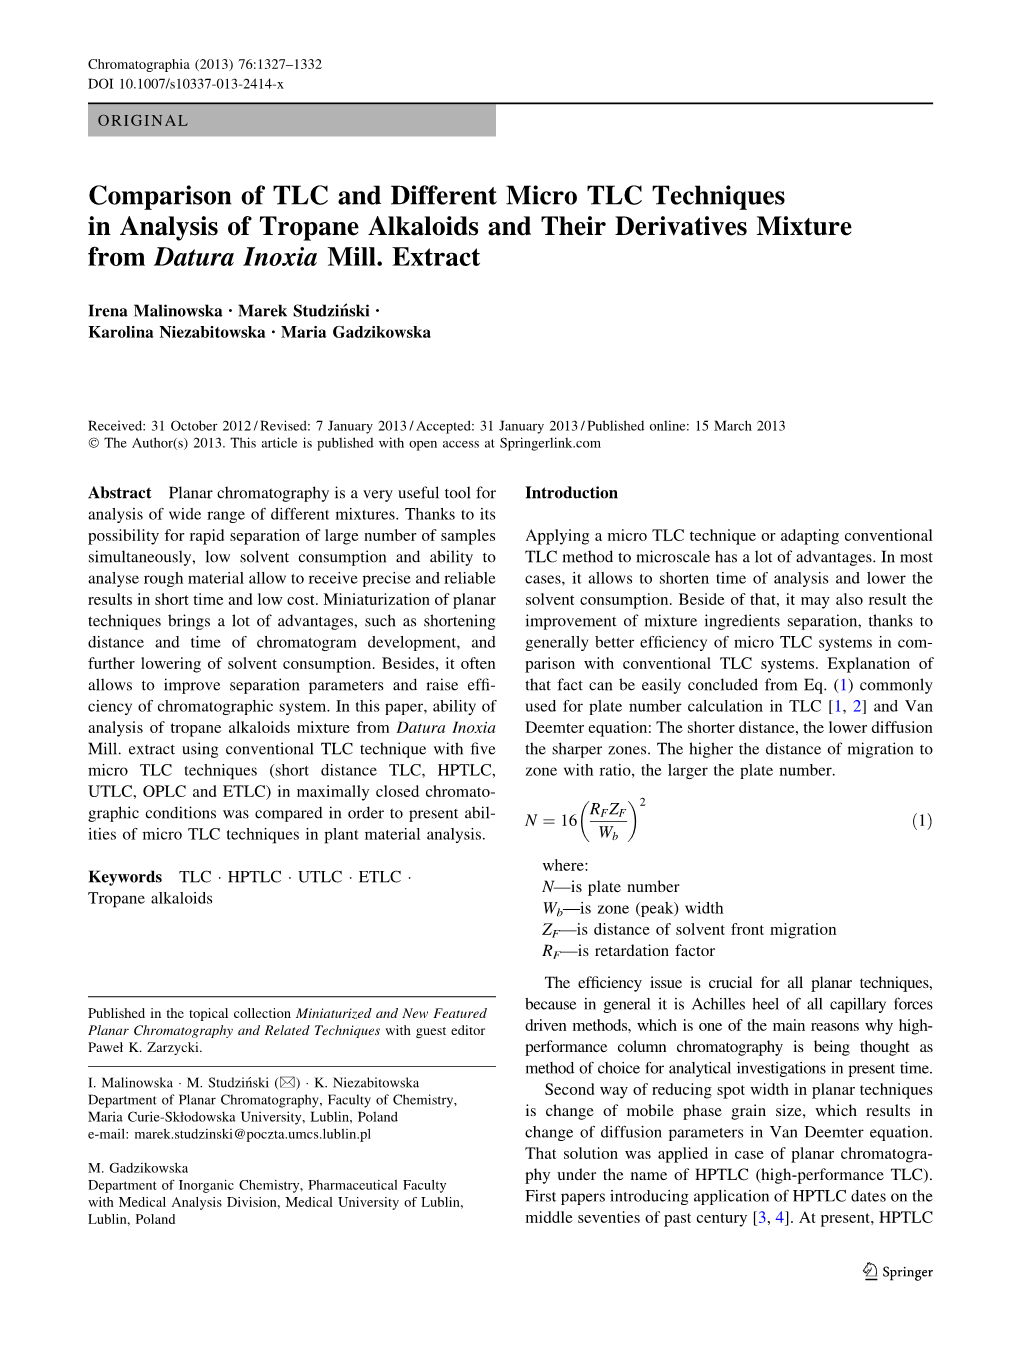 Comparison of TLC and Different Micro TLC Techniques in Analysis of Tropane Alkaloids and Their Derivatives Mixture from Datura Inoxia Mill